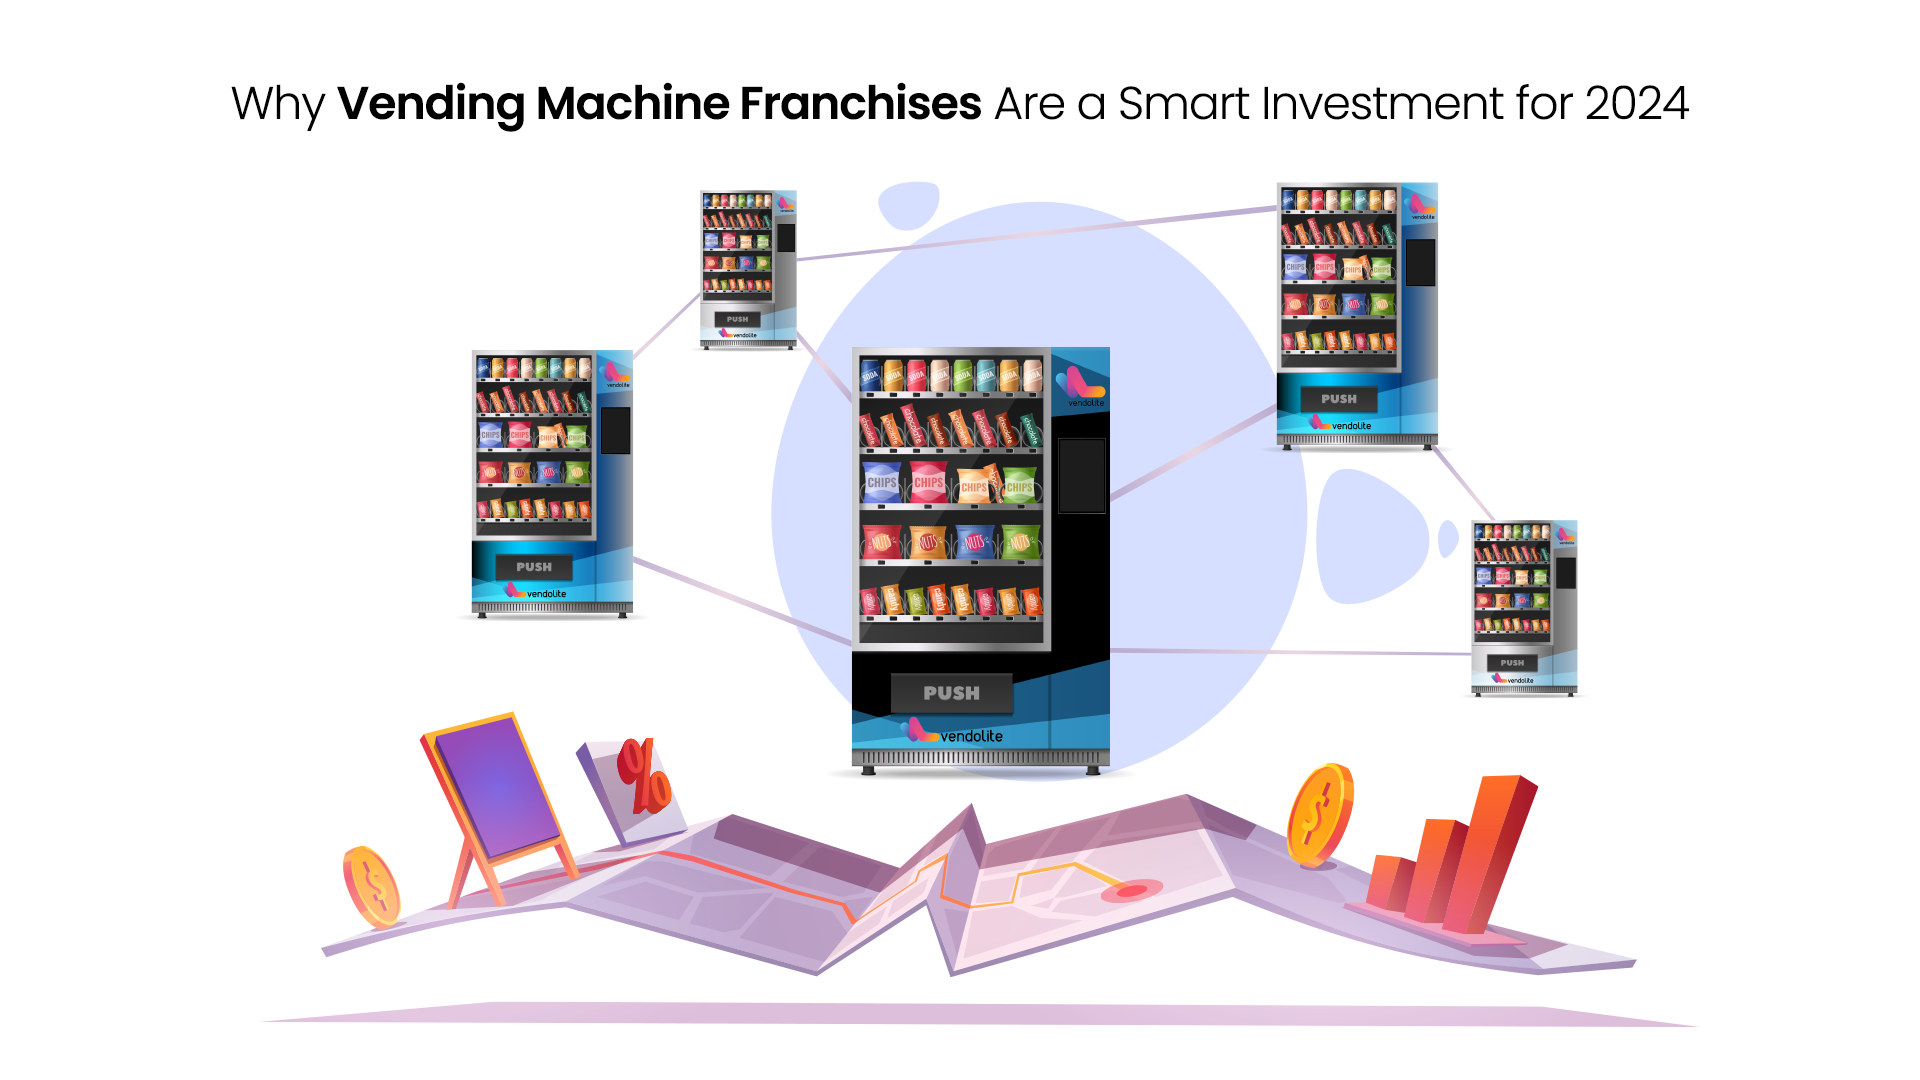 Why Vending Machine Franchises Are a Smart Investment for 2024